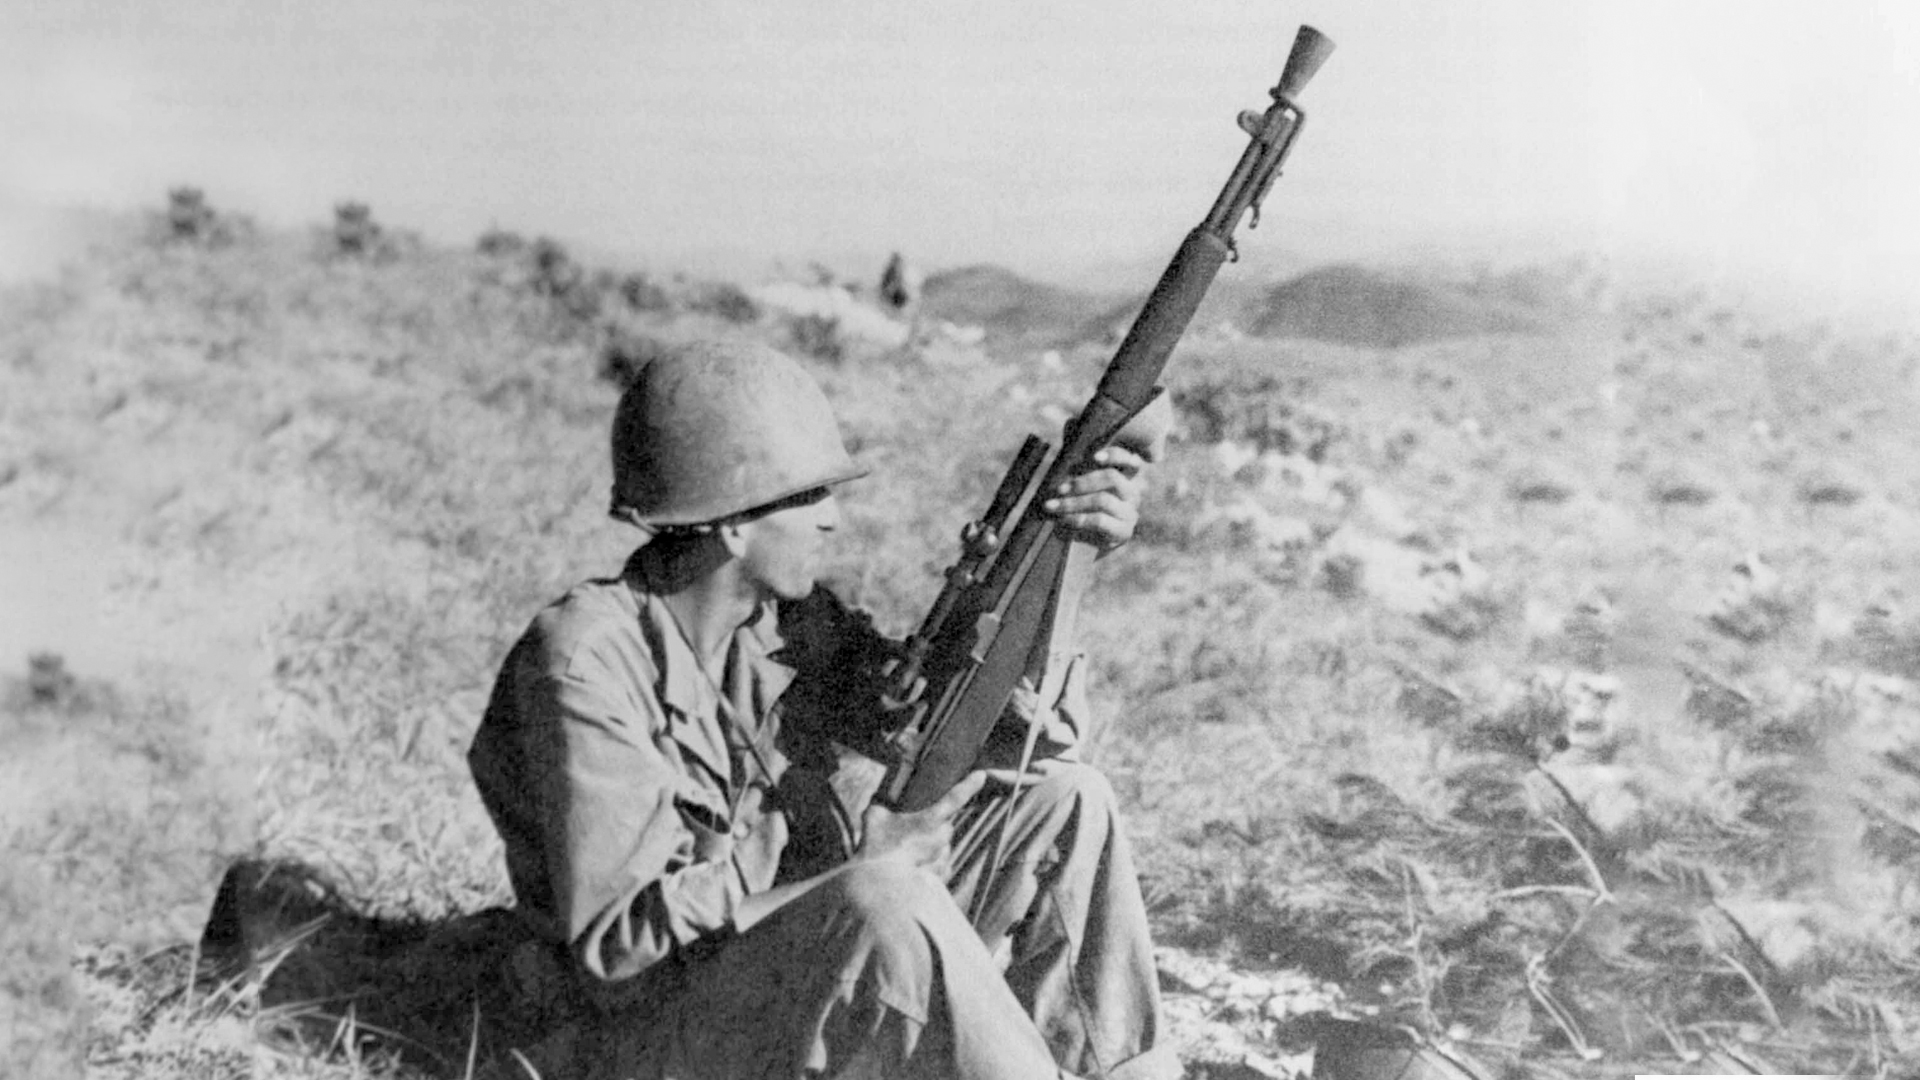 famous american snipers of ww2